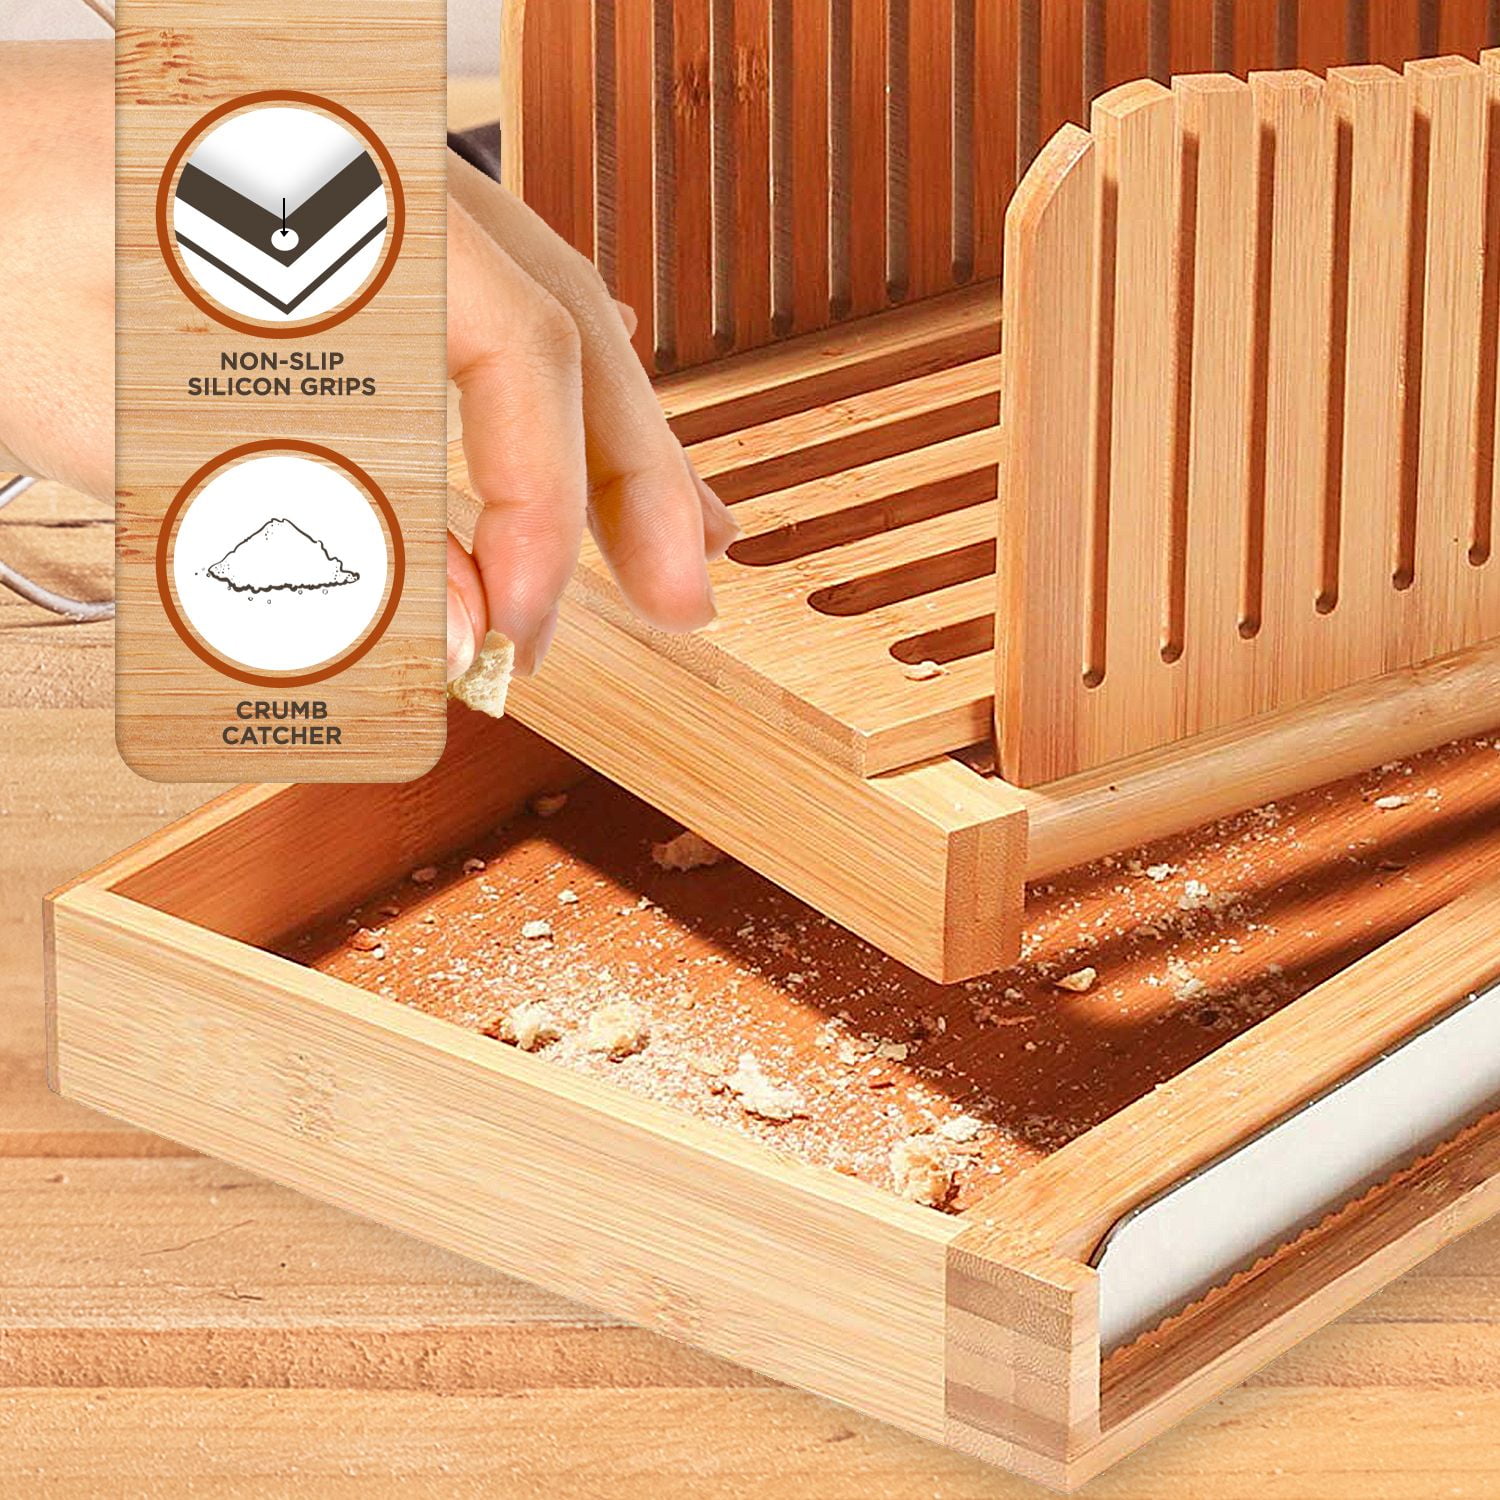 Bamboo Bread Slicer with Serrated Knife, Adjustable Bread Slicer Guide with  3 Thickness Size, Foldable Compact Chopping Cutting Board with Crumb Tray